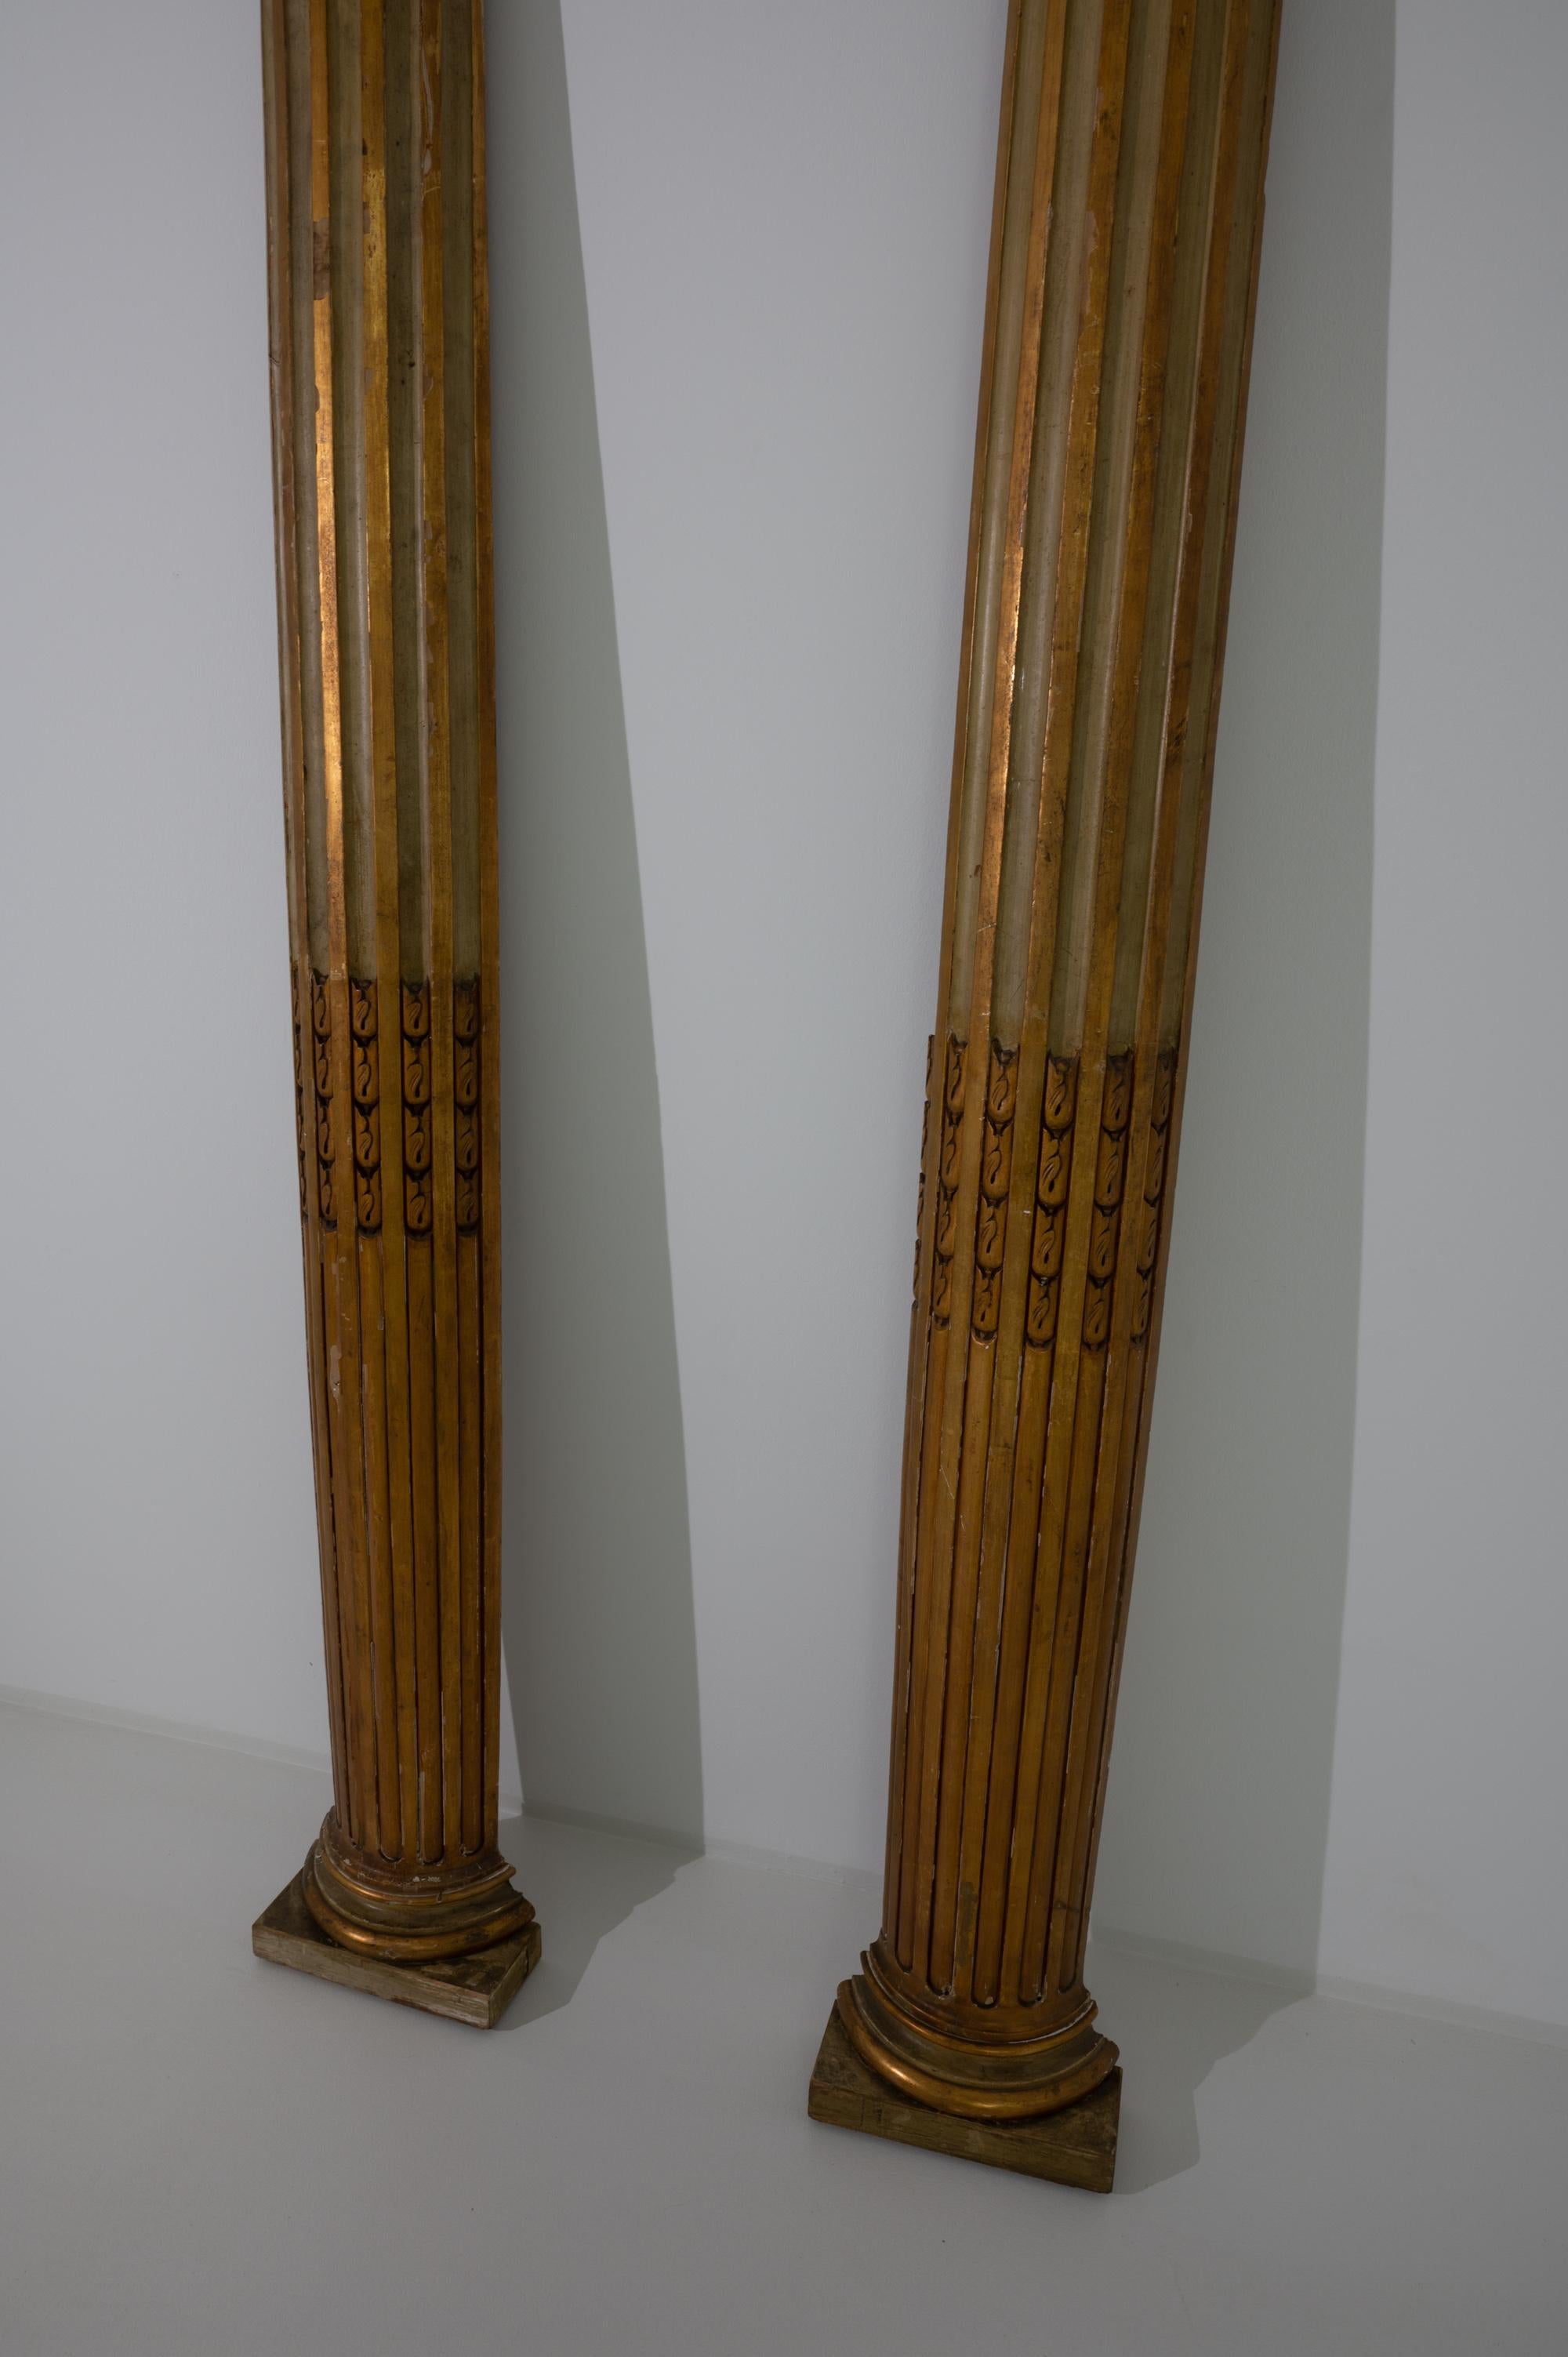 This pair of antique wooden columns was produced in France, circa 1880. Crowned by carved scrolls and adorned with fluted moldings, these two tall columns take on a corinthian inspiration. Elevated on a discrete base, these regal columns feature two